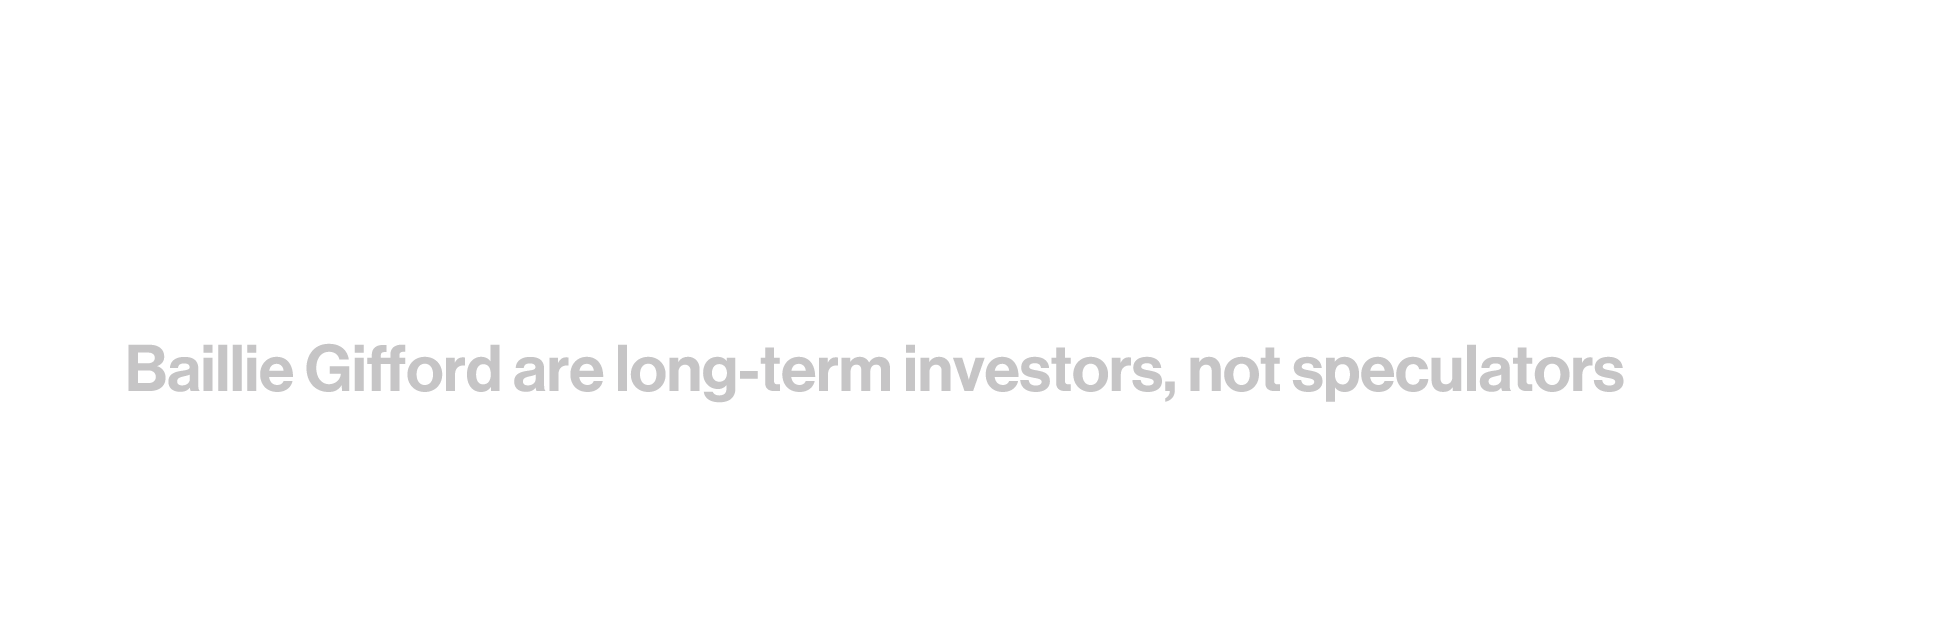 Baillie Gifford Actual Investors, Baillie Gifford are long-term investors, not speculators 揺るぎない信念、長期投資